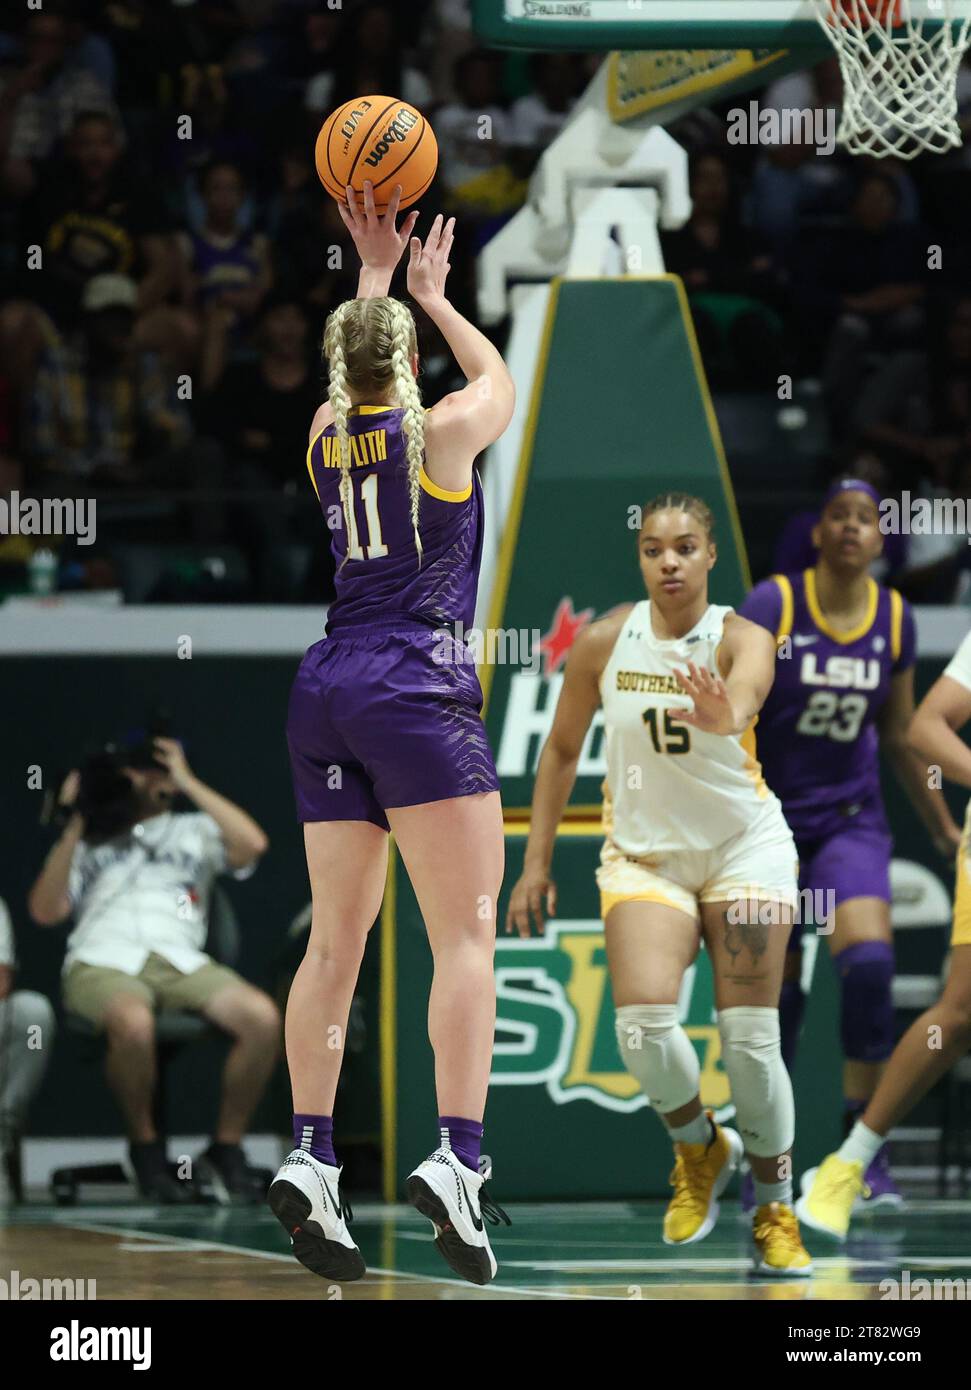 Hammond, USA. 17th Nov, 2023. LSU Lady Tigers guard Hailey Van Lith (11) shoots a three-pointer during a women's college basketball game at the University Center in Hammond, Louisiana on Friday, November 17, 2023. (Photo by Peter G. Forest/Sipa USA) Credit: Sipa USA/Alamy Live News Stock Photo